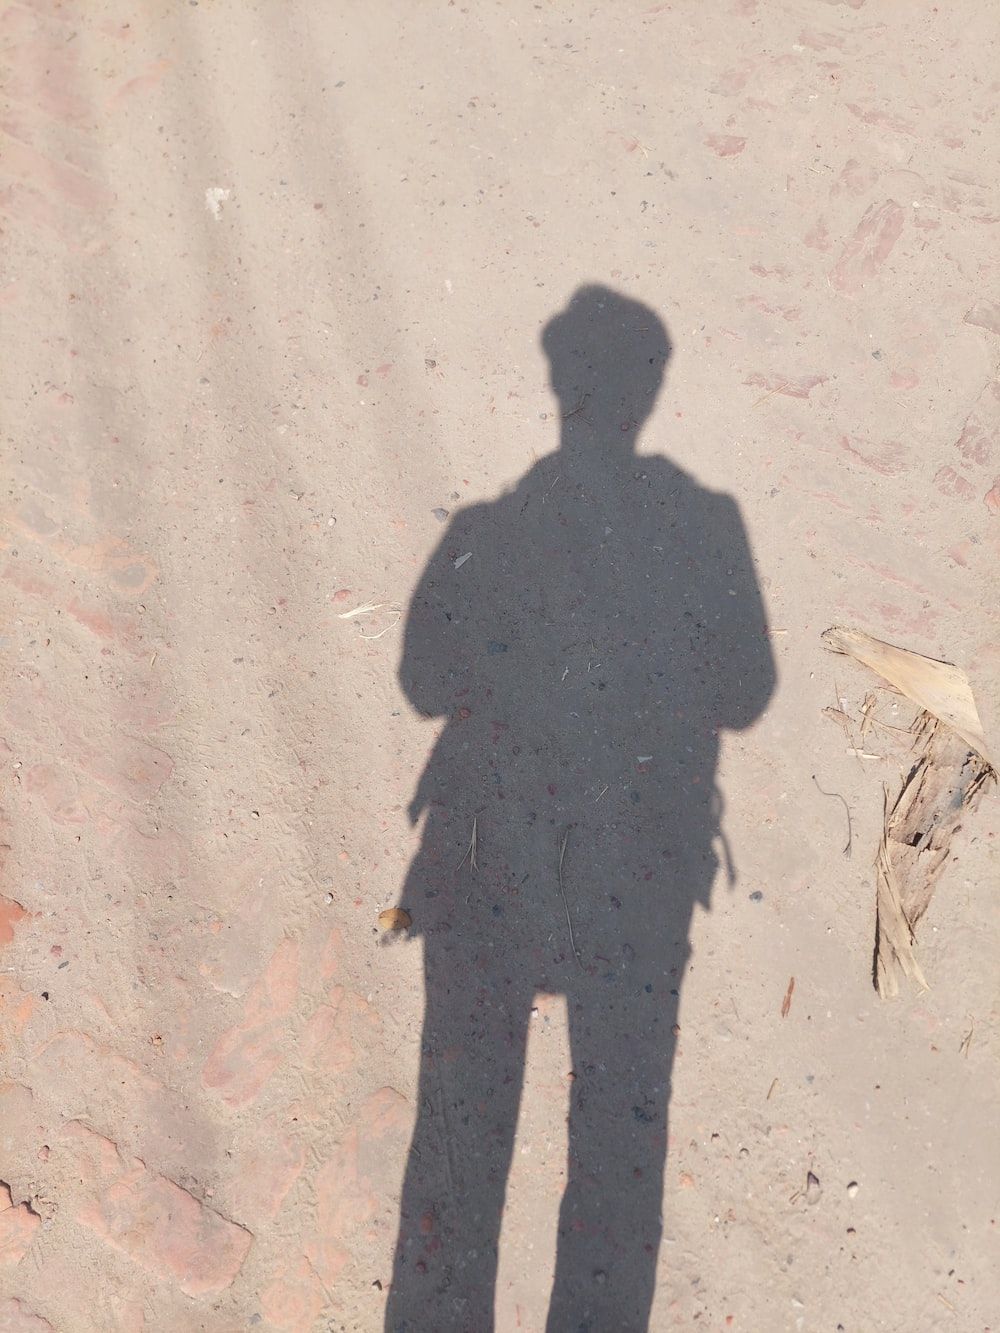 A shadow of a person standing in the dirt photo